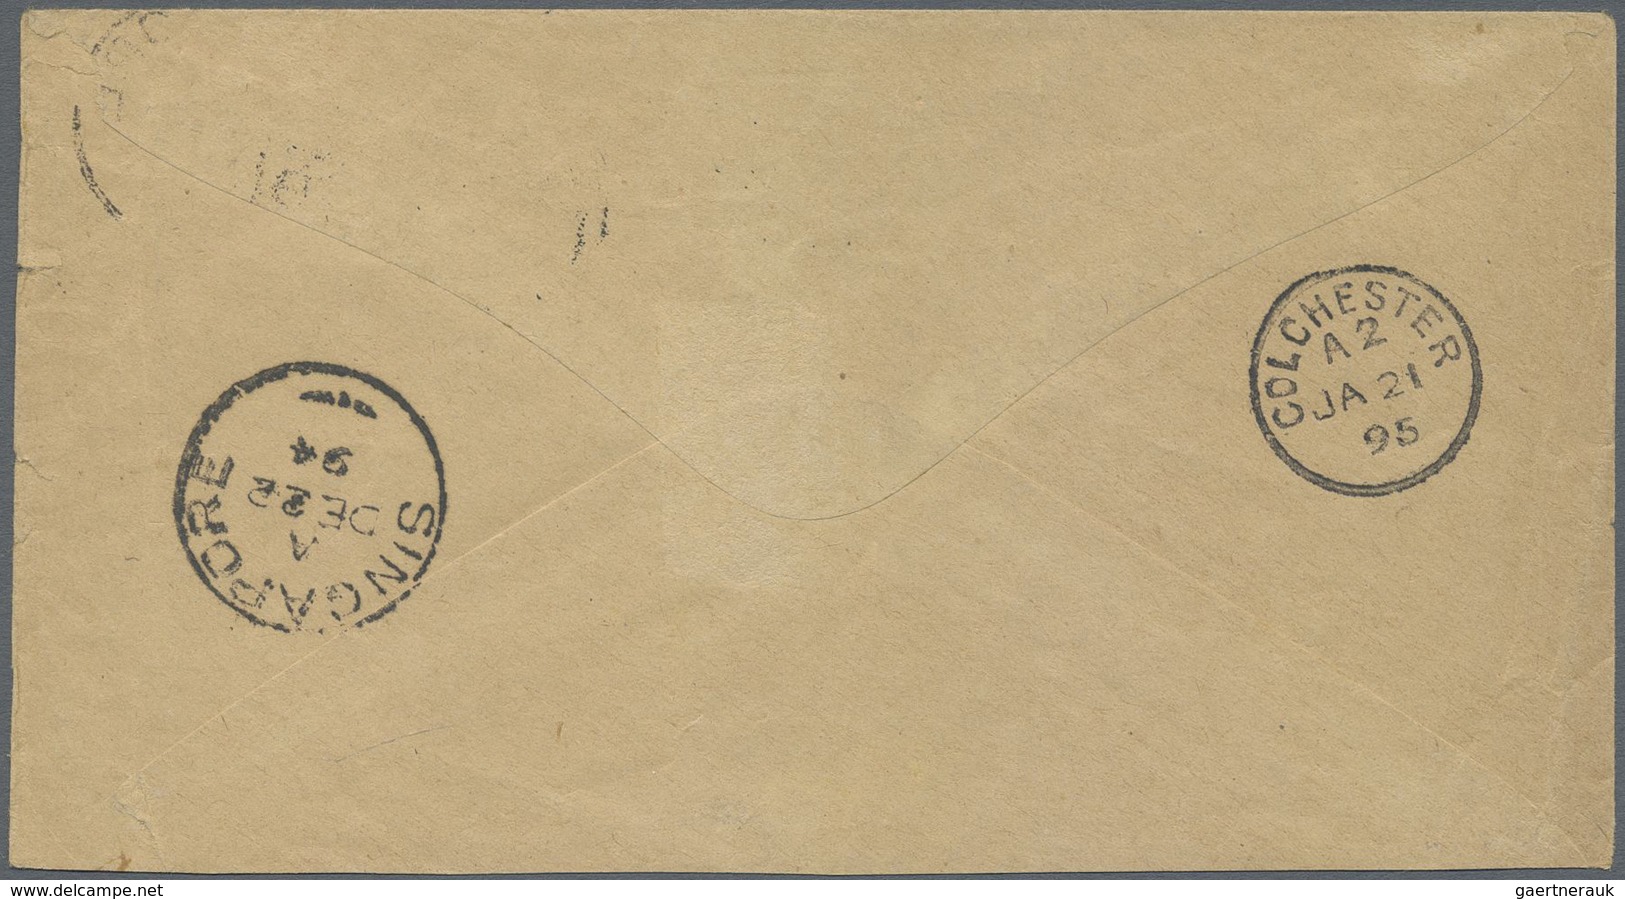 Br Malaiische Staaten - Johor: 1894 Cover To Colchester, England Franked By Johore 3c. (local Rate From - Johore